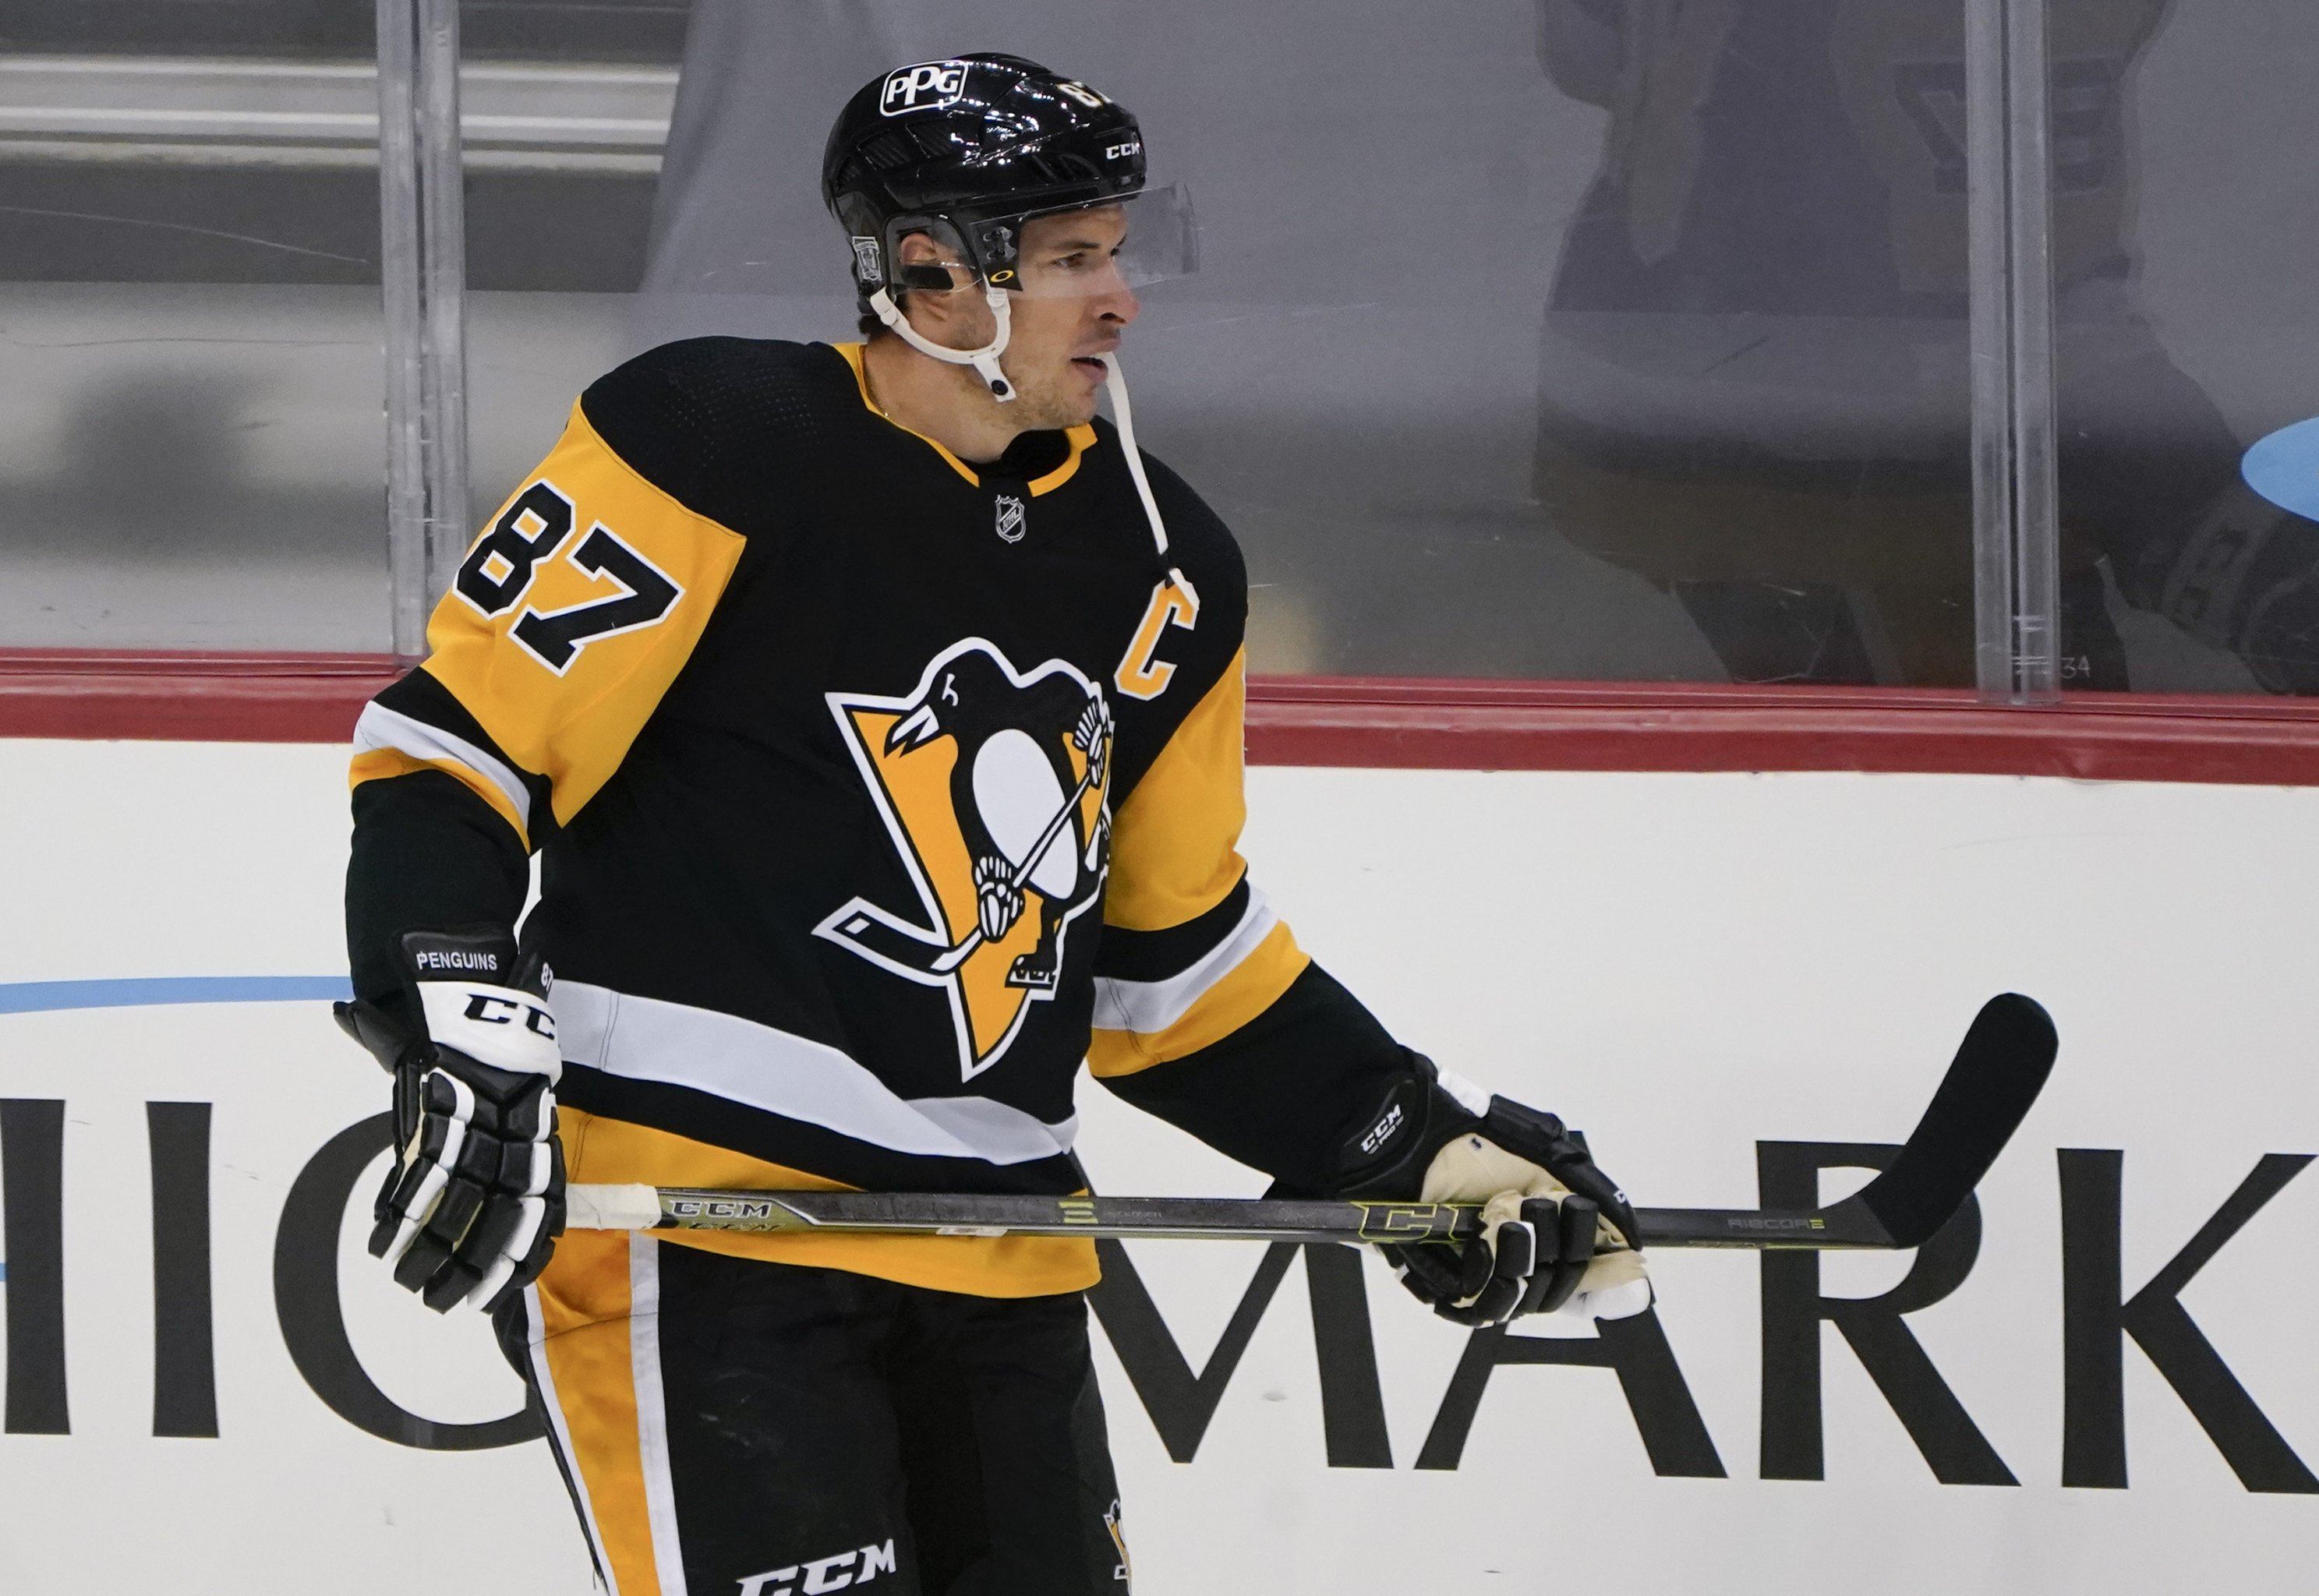 Report: Sidney Crosby's jersey predicted as one of the highest